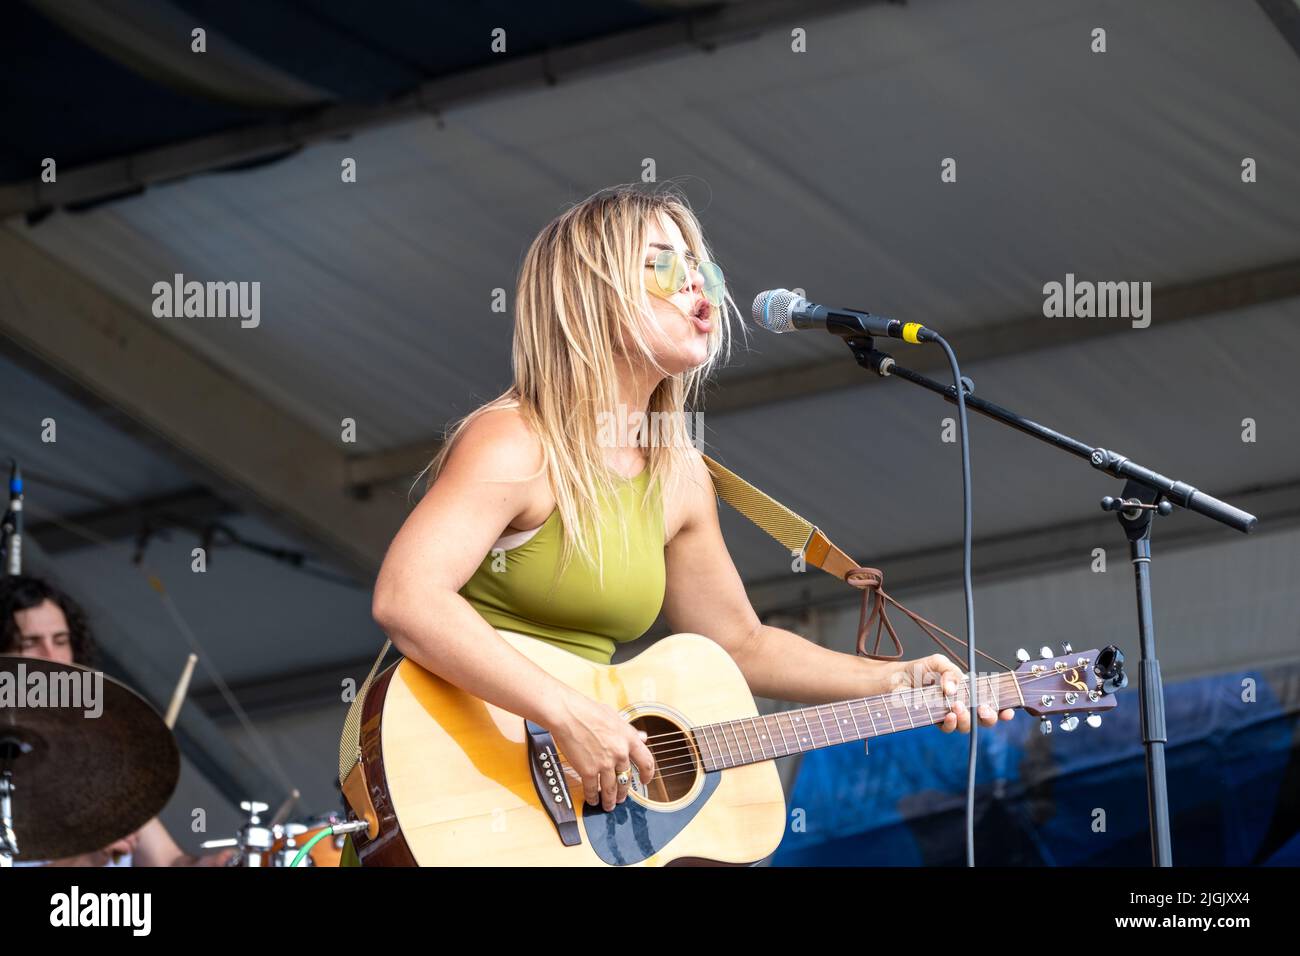 NEW ORLEANS, LA, USA - MAY 1, 2022: Maggie Koerner plays guitar and sings at the 2022 New Orleans Jazz and Heritage Festival Stock Photo